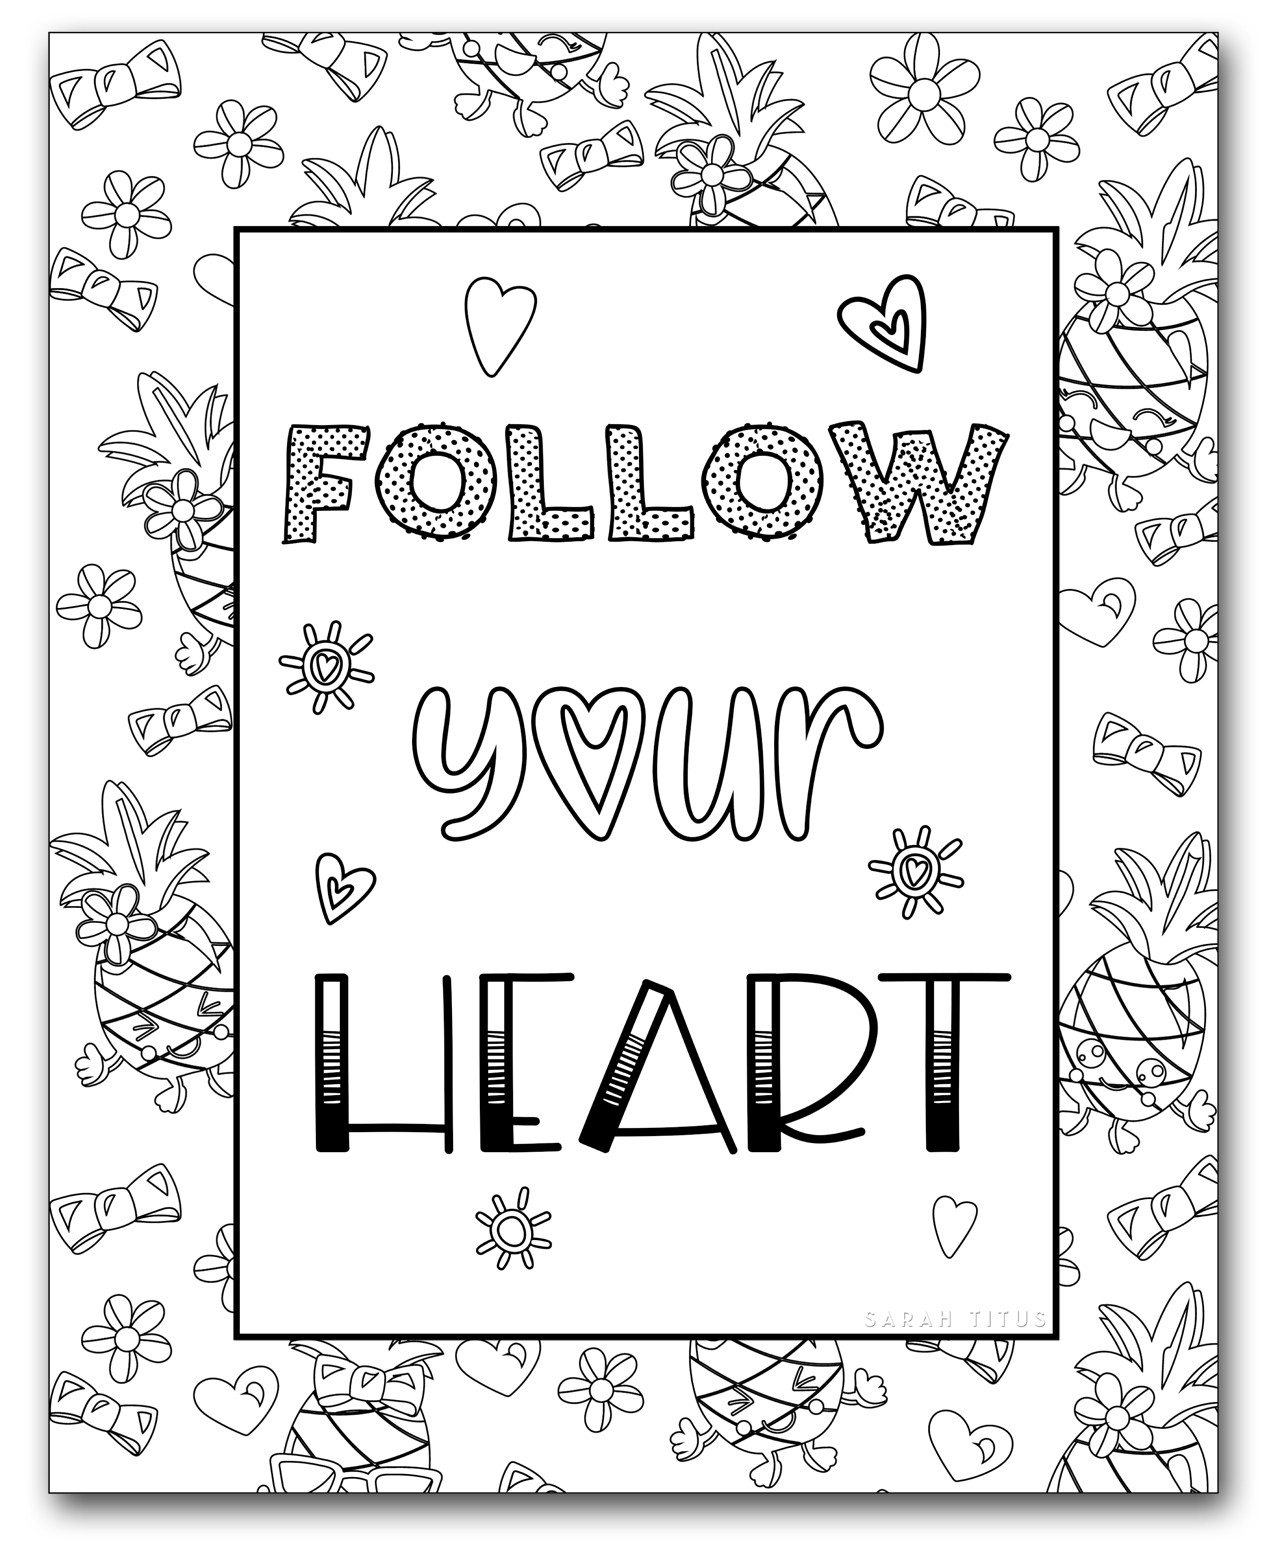 Online Printable Coloring Pages For Girls
 Printable Coloring Pages for Girls Sarah Titus